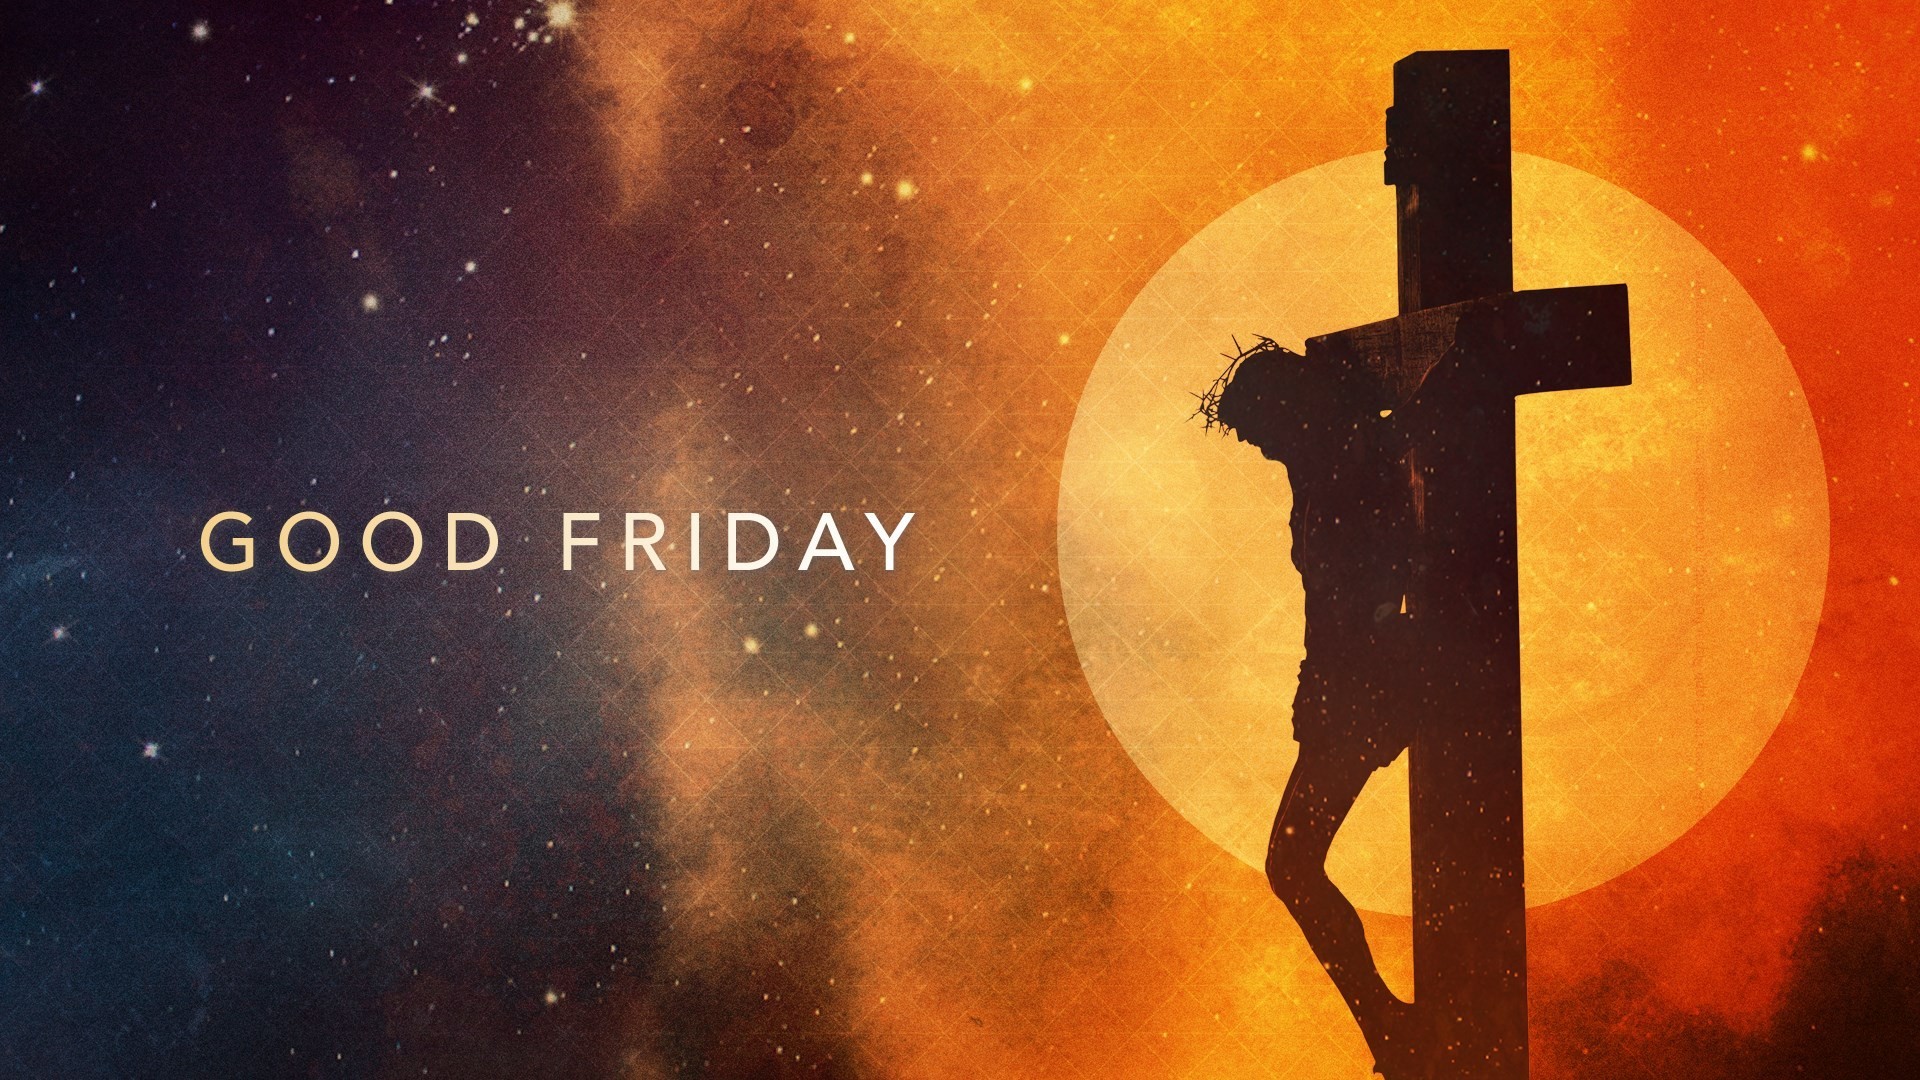 1920x1080, Good Friday Images Photos Pics & Pictures - Jesus Crucified Good  Friday - 1920x1080 Wallpaper 